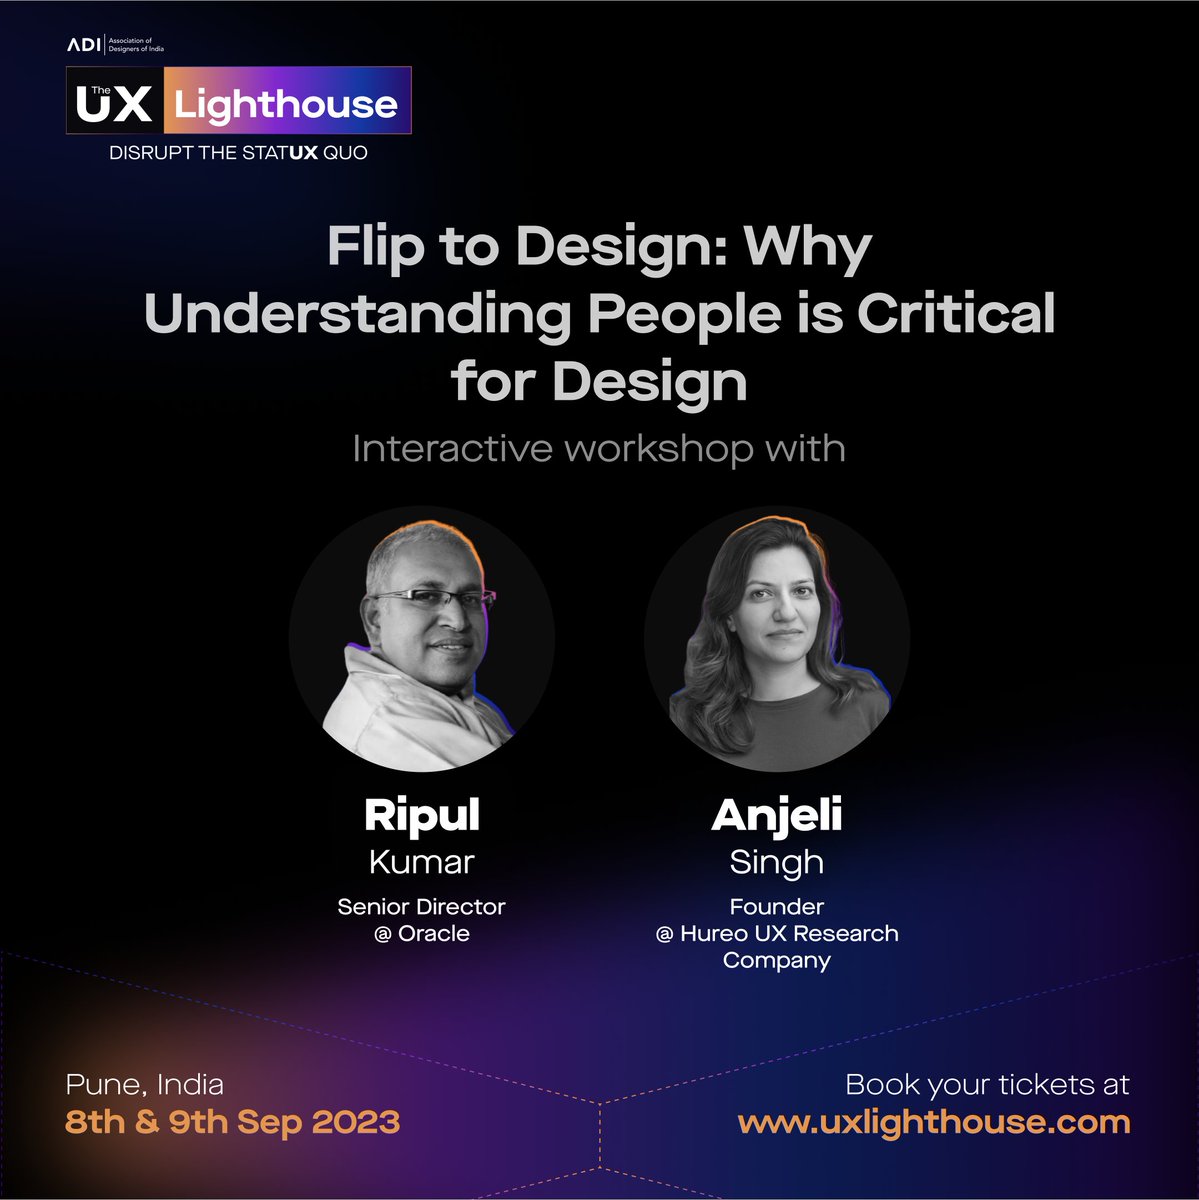 Anjeli has been running Hureo, India's leading User Research consultancy for the last 9 years and works with large global clients. 
Ripul ran Kern & helped set up research at many global corporations. He currently works with the design team at Oracle.
#ADI #ADIPune  #UXLighthouse